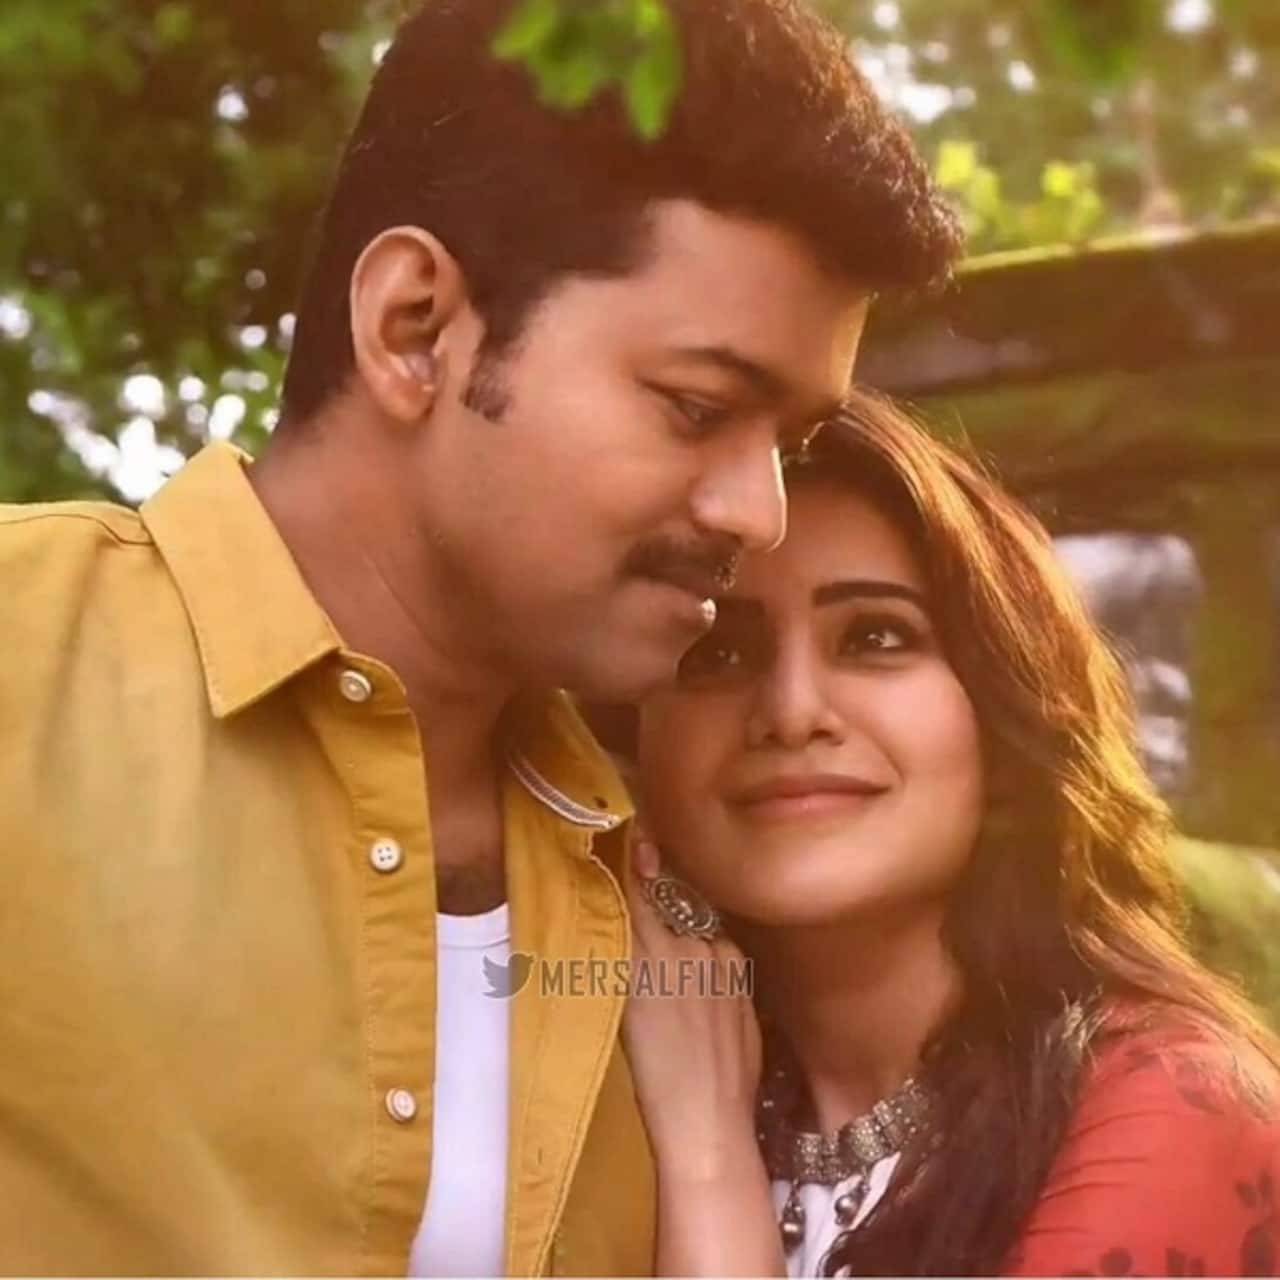 Samantha Ruth Prabhu believes Thalapathy Vijay's Mersal with Atlee will  strike gold again after Theri - Bollywood News & Gossip, Movie Reviews,  Trailers & Videos at 